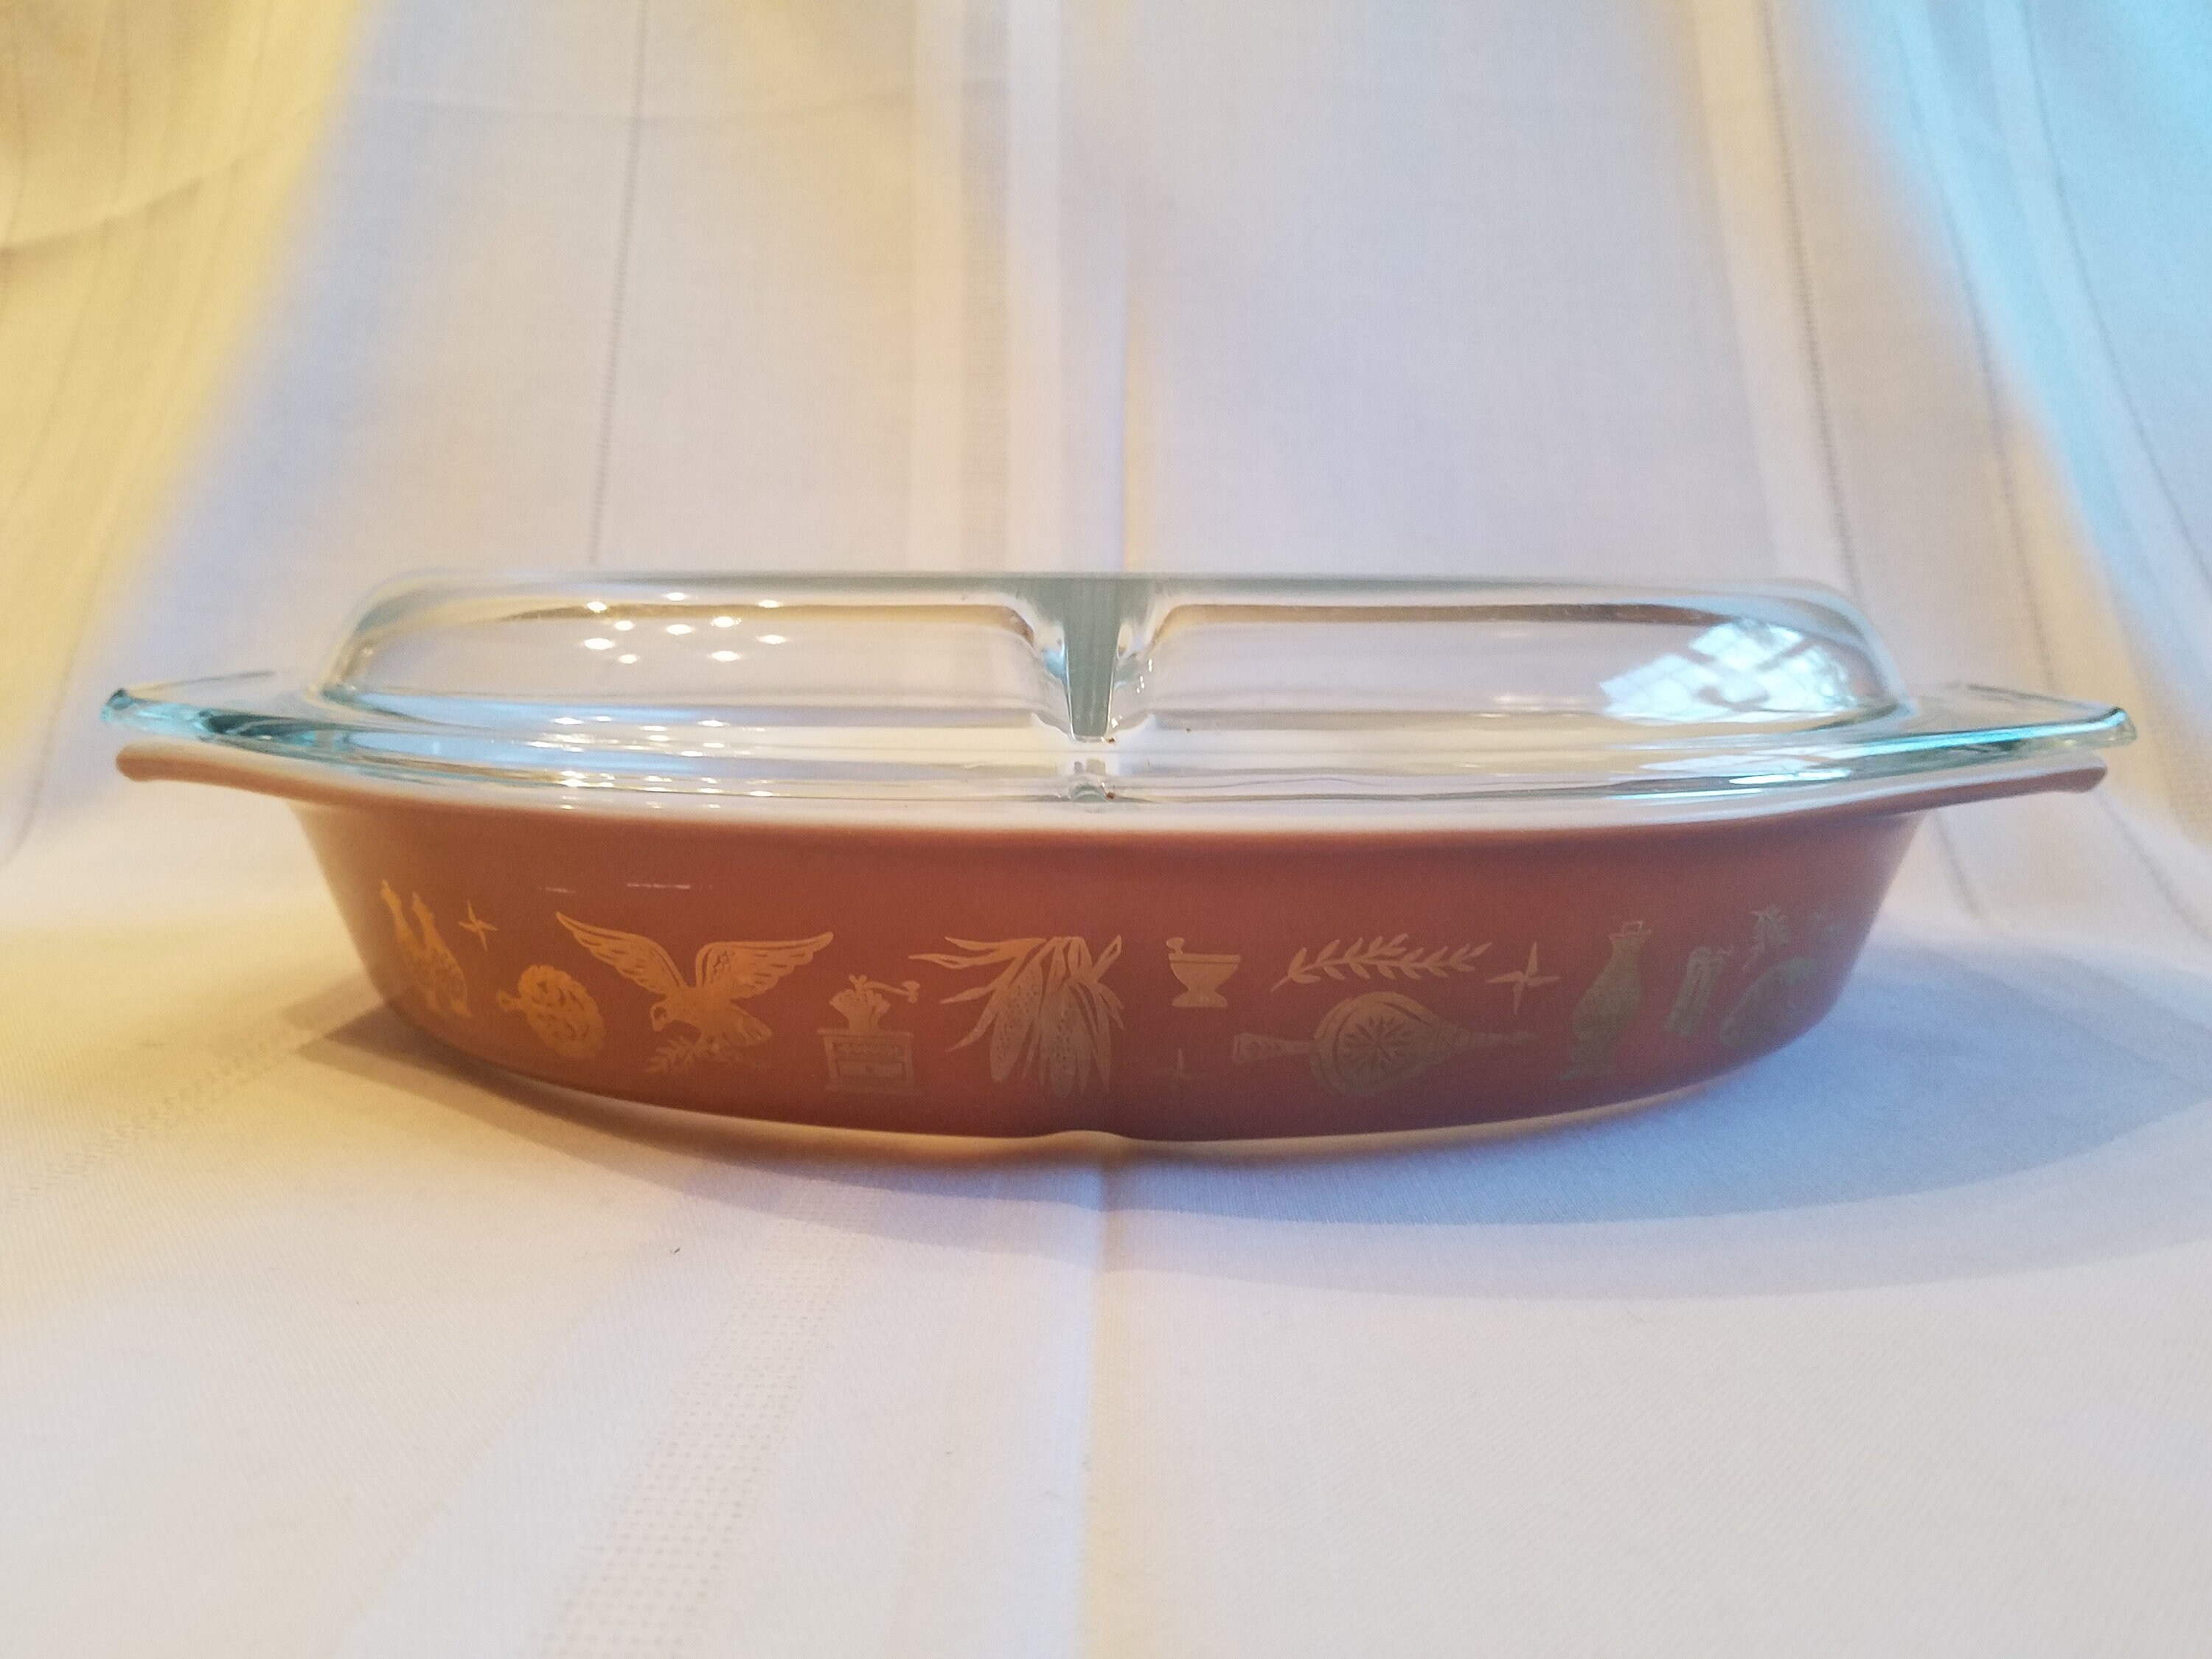 Vtg PYREX 1.5 qt USA Divided Casserole Dish w/ Lid 945 C 36 ~ EARLY AMERICAN